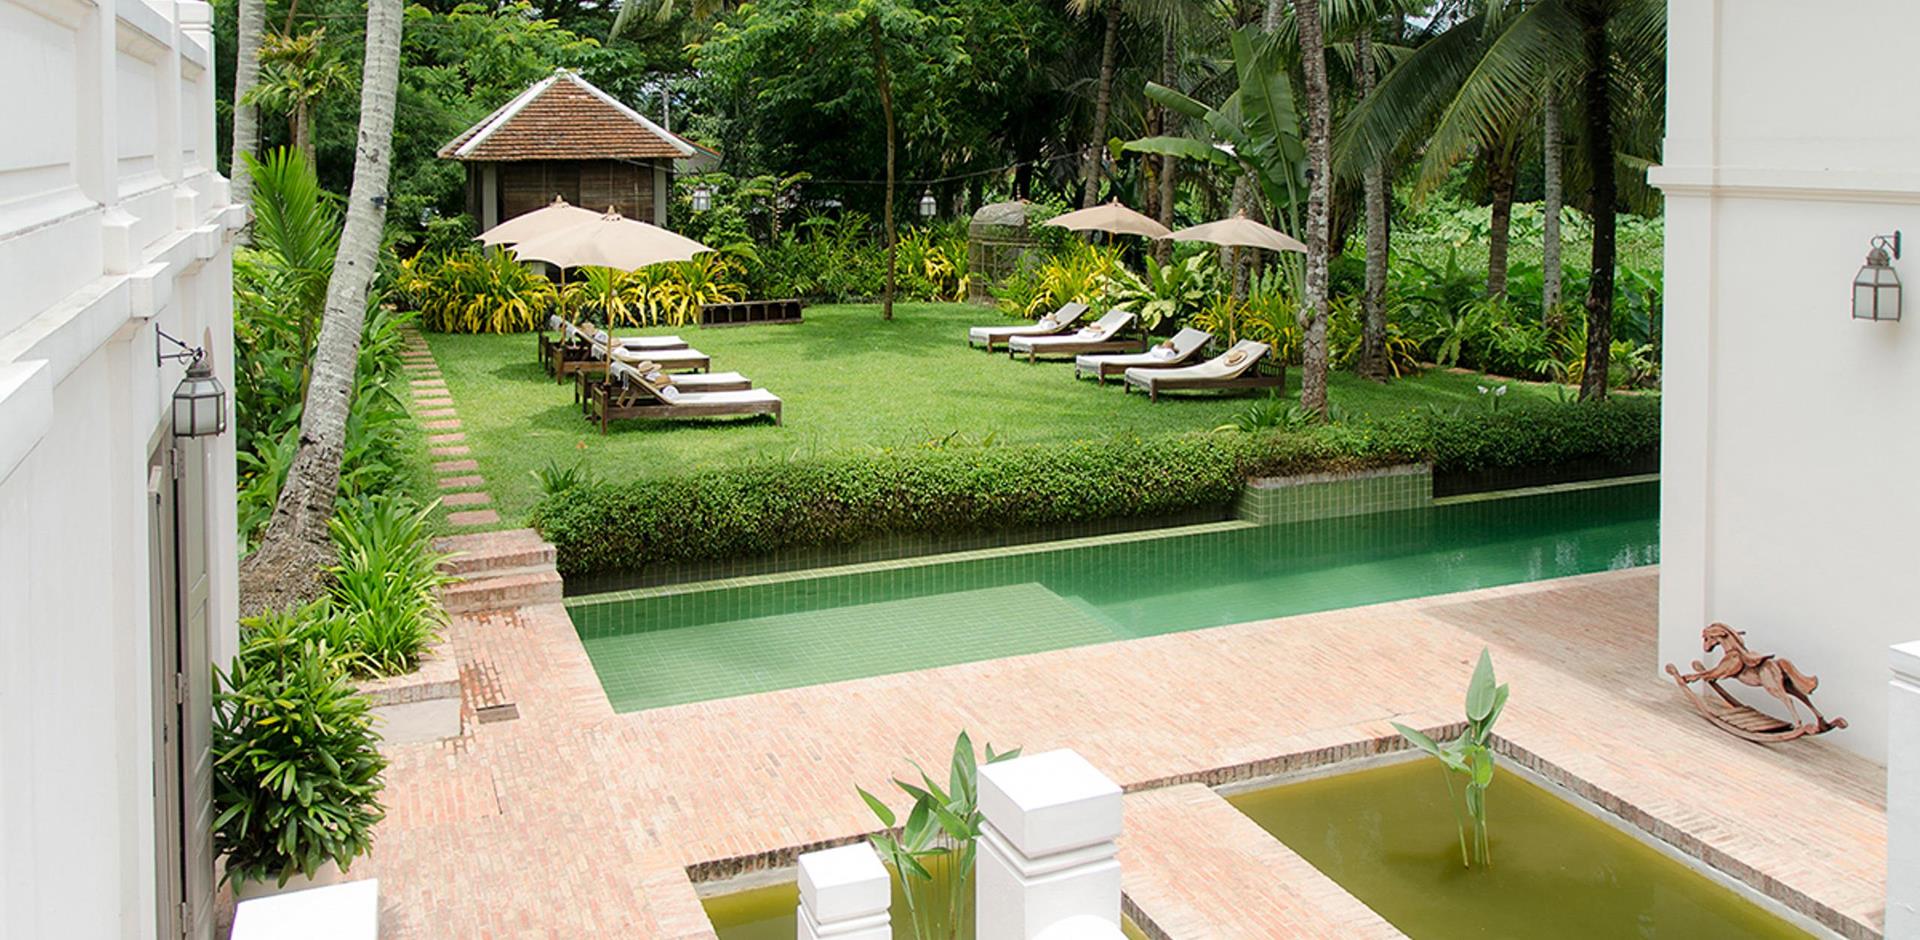 Pool and loungers, Satri House, Laos